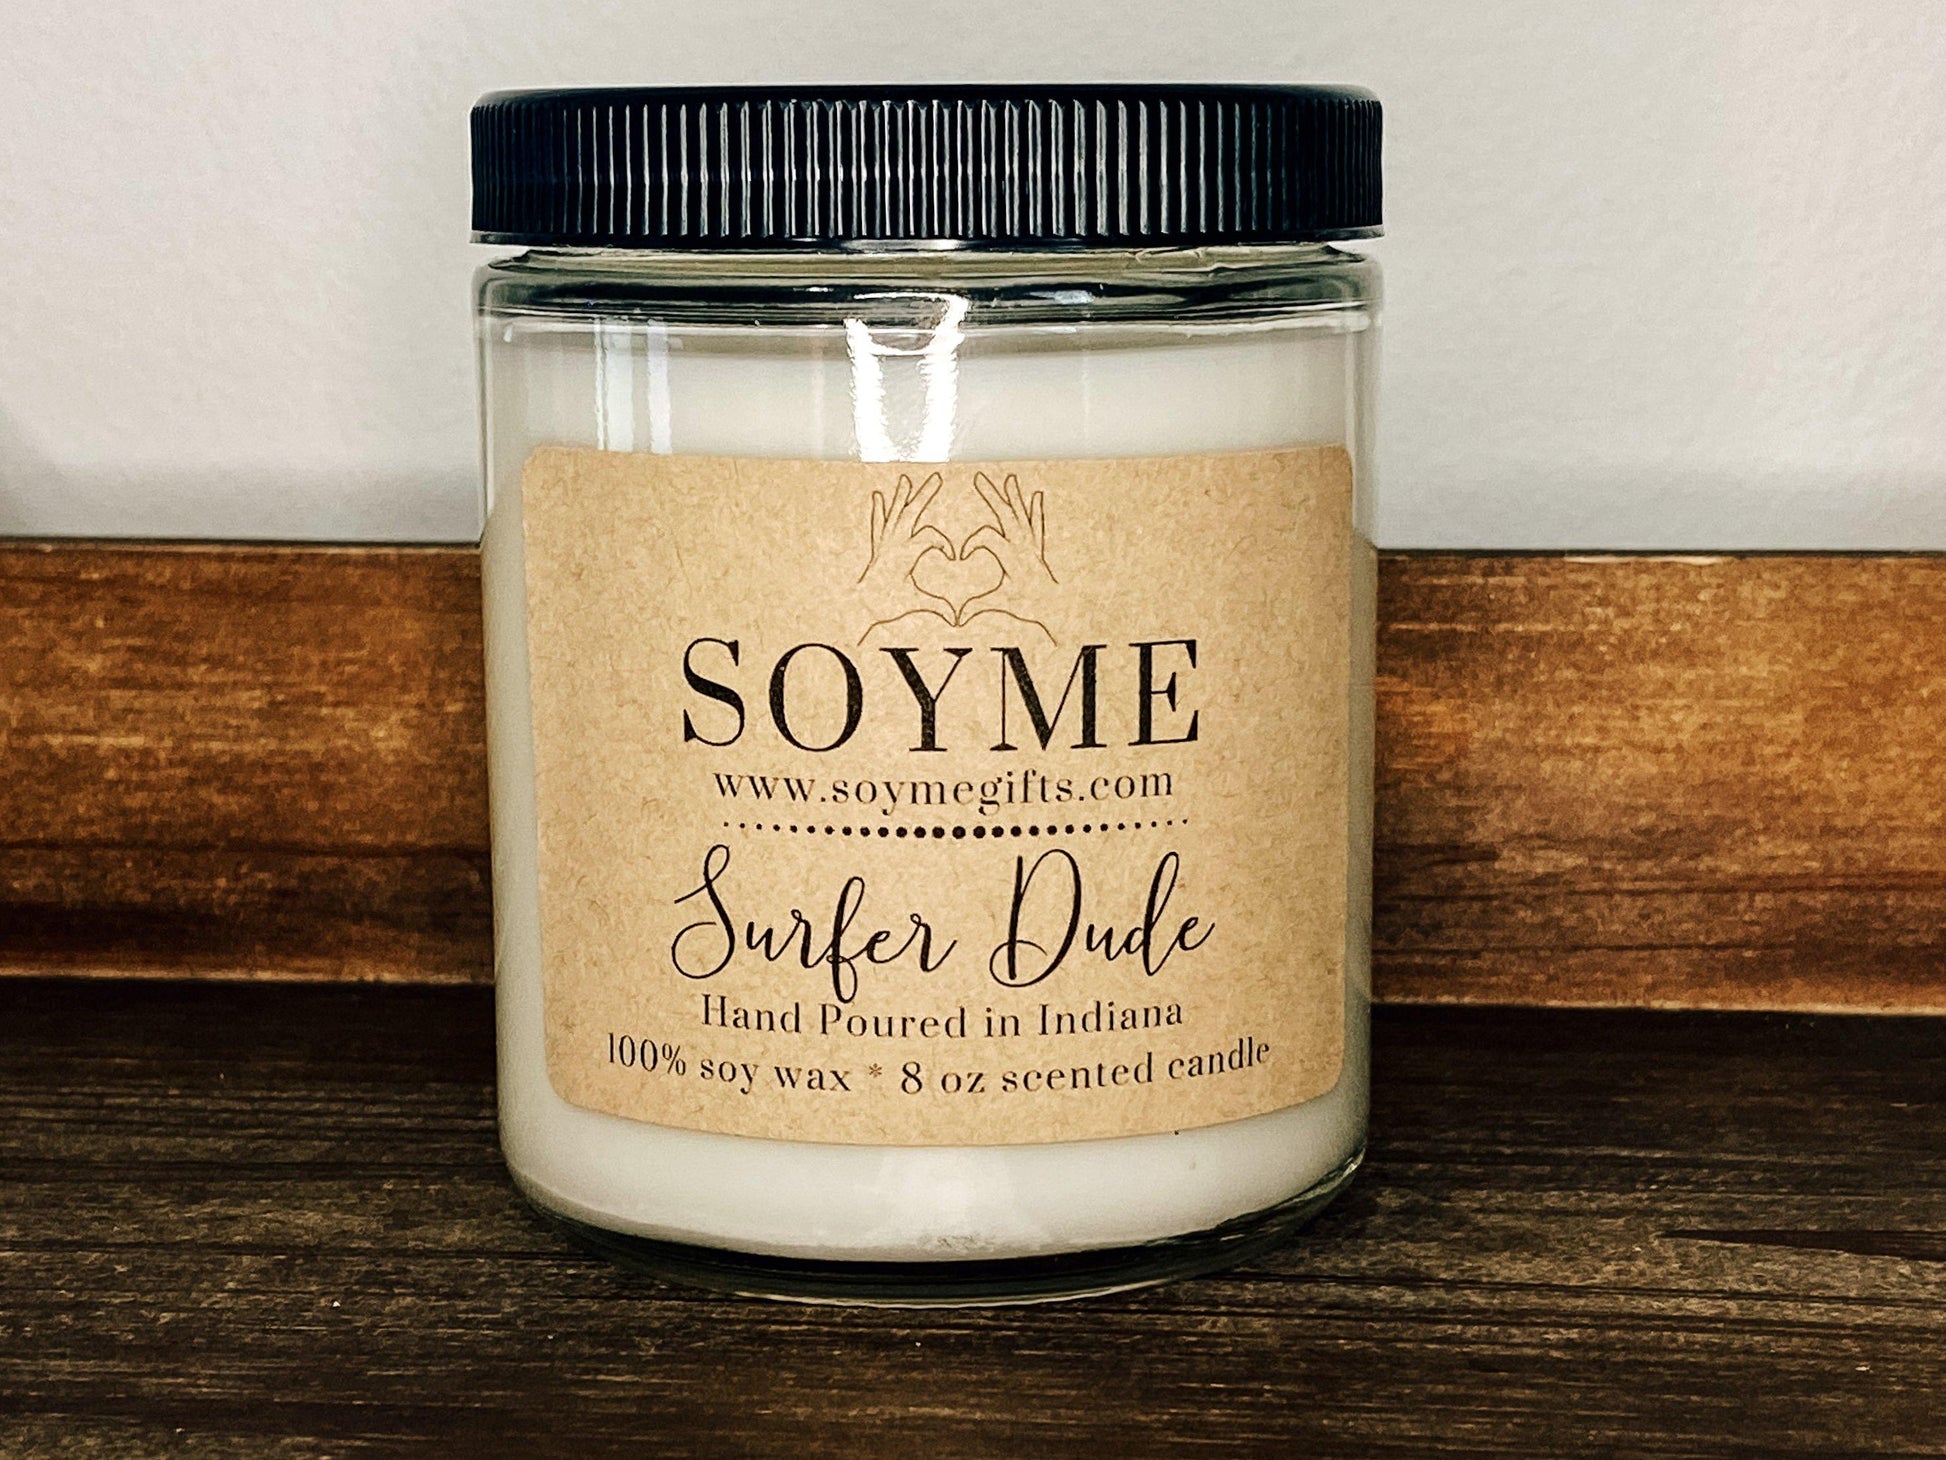 Surfer Dude - Soyme Gifts